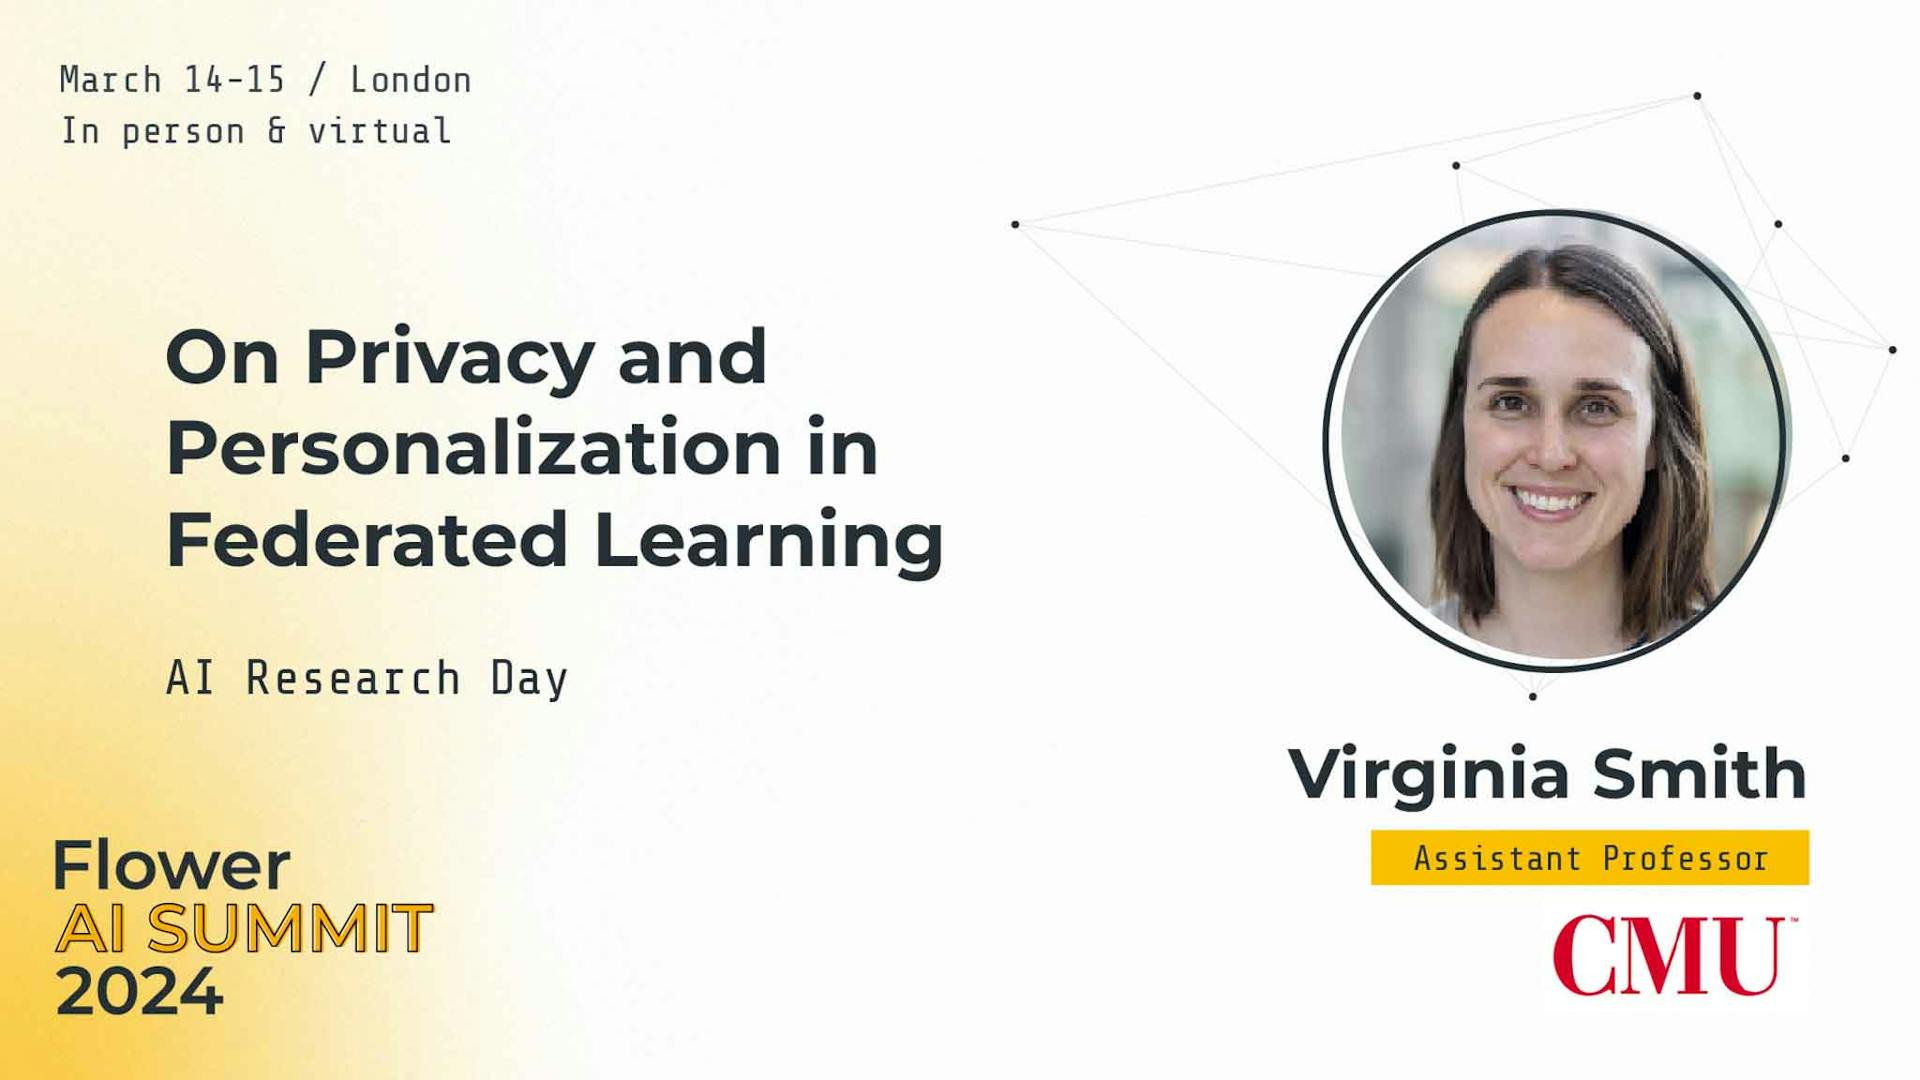 On Privacy and Personalization in Federated Learning, by Virginia Smith